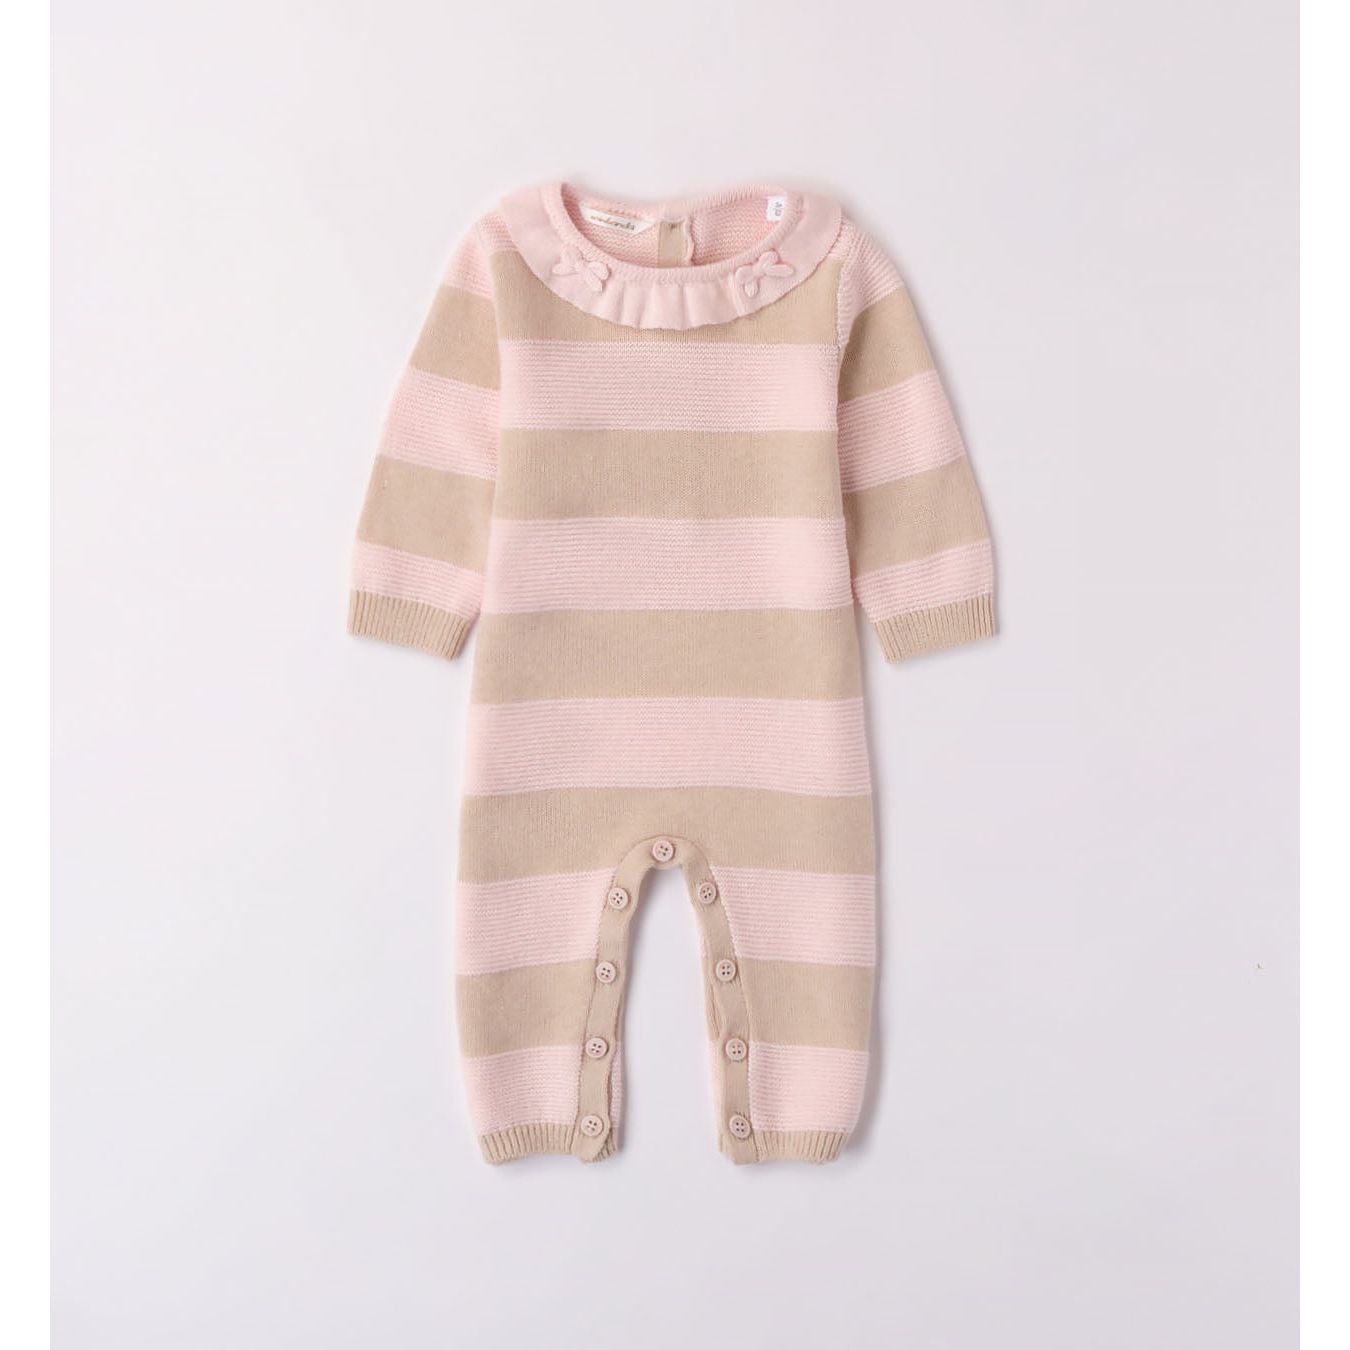 Pale Pink and Beige Romper 3291 - Lala Kids 